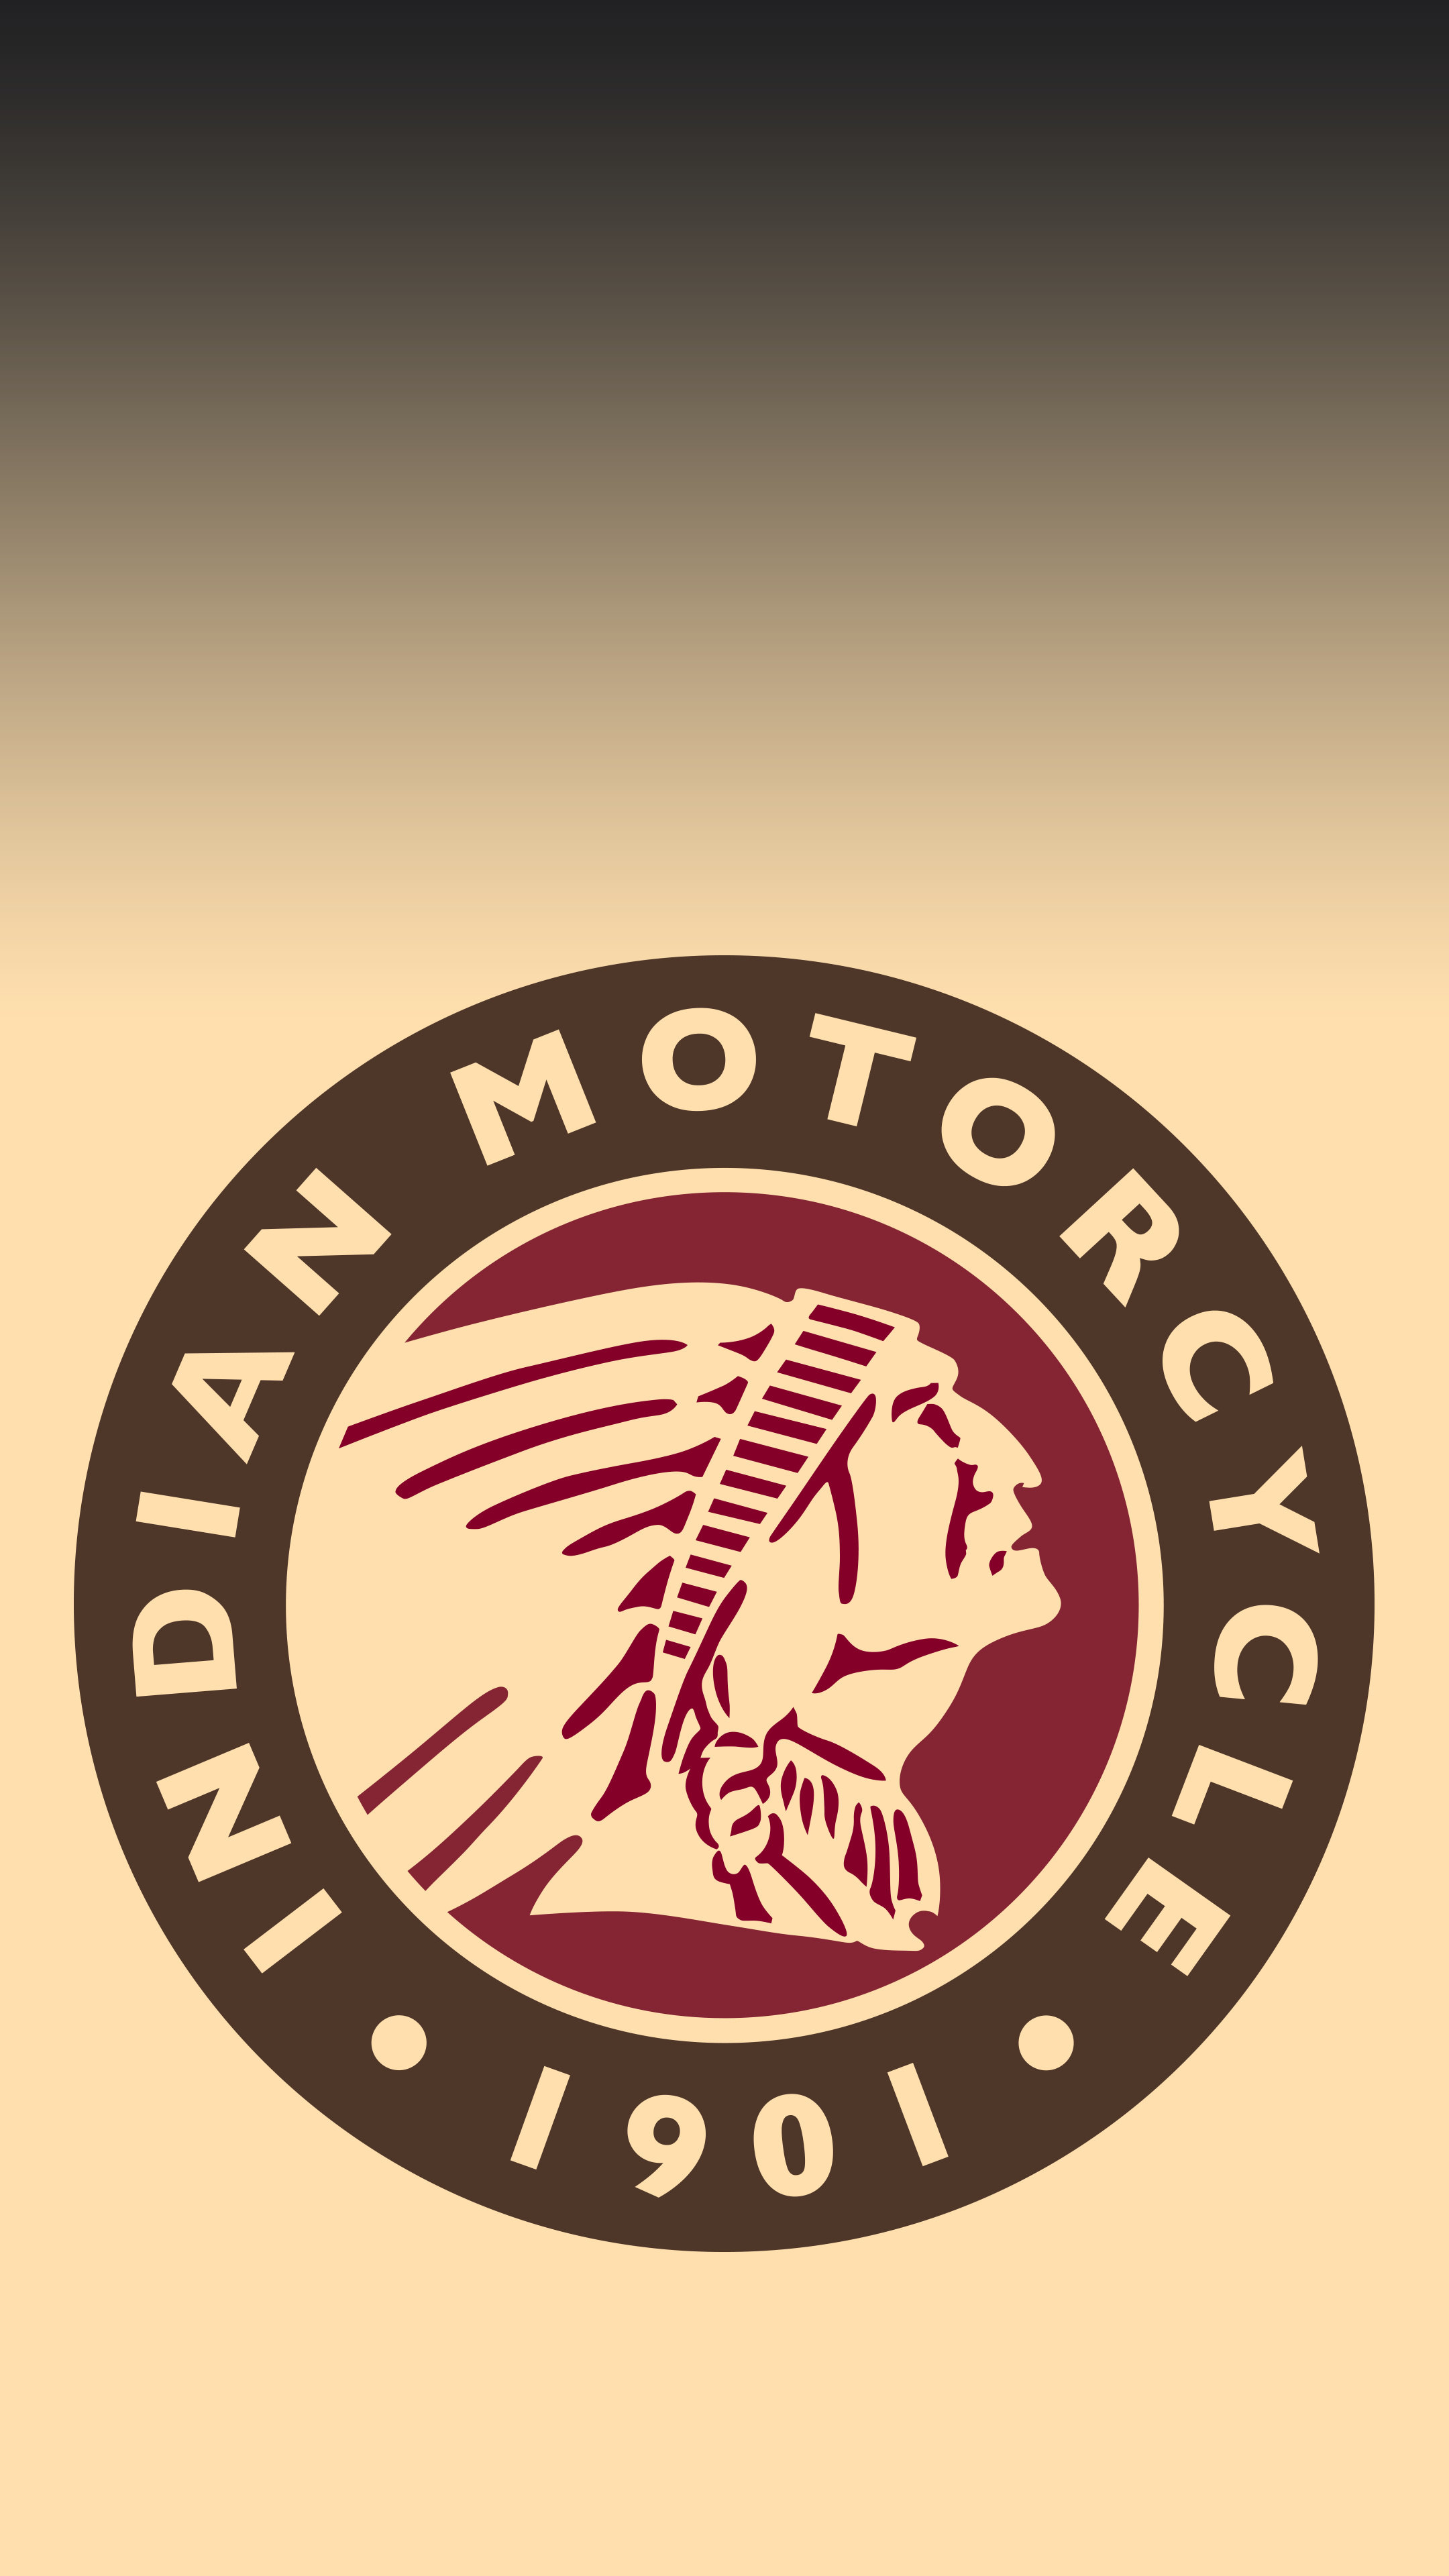 Indian Motorcycle, HD mobile wallpaper, High quality images, Motorcycle photography, 2160x3840 4K Handy